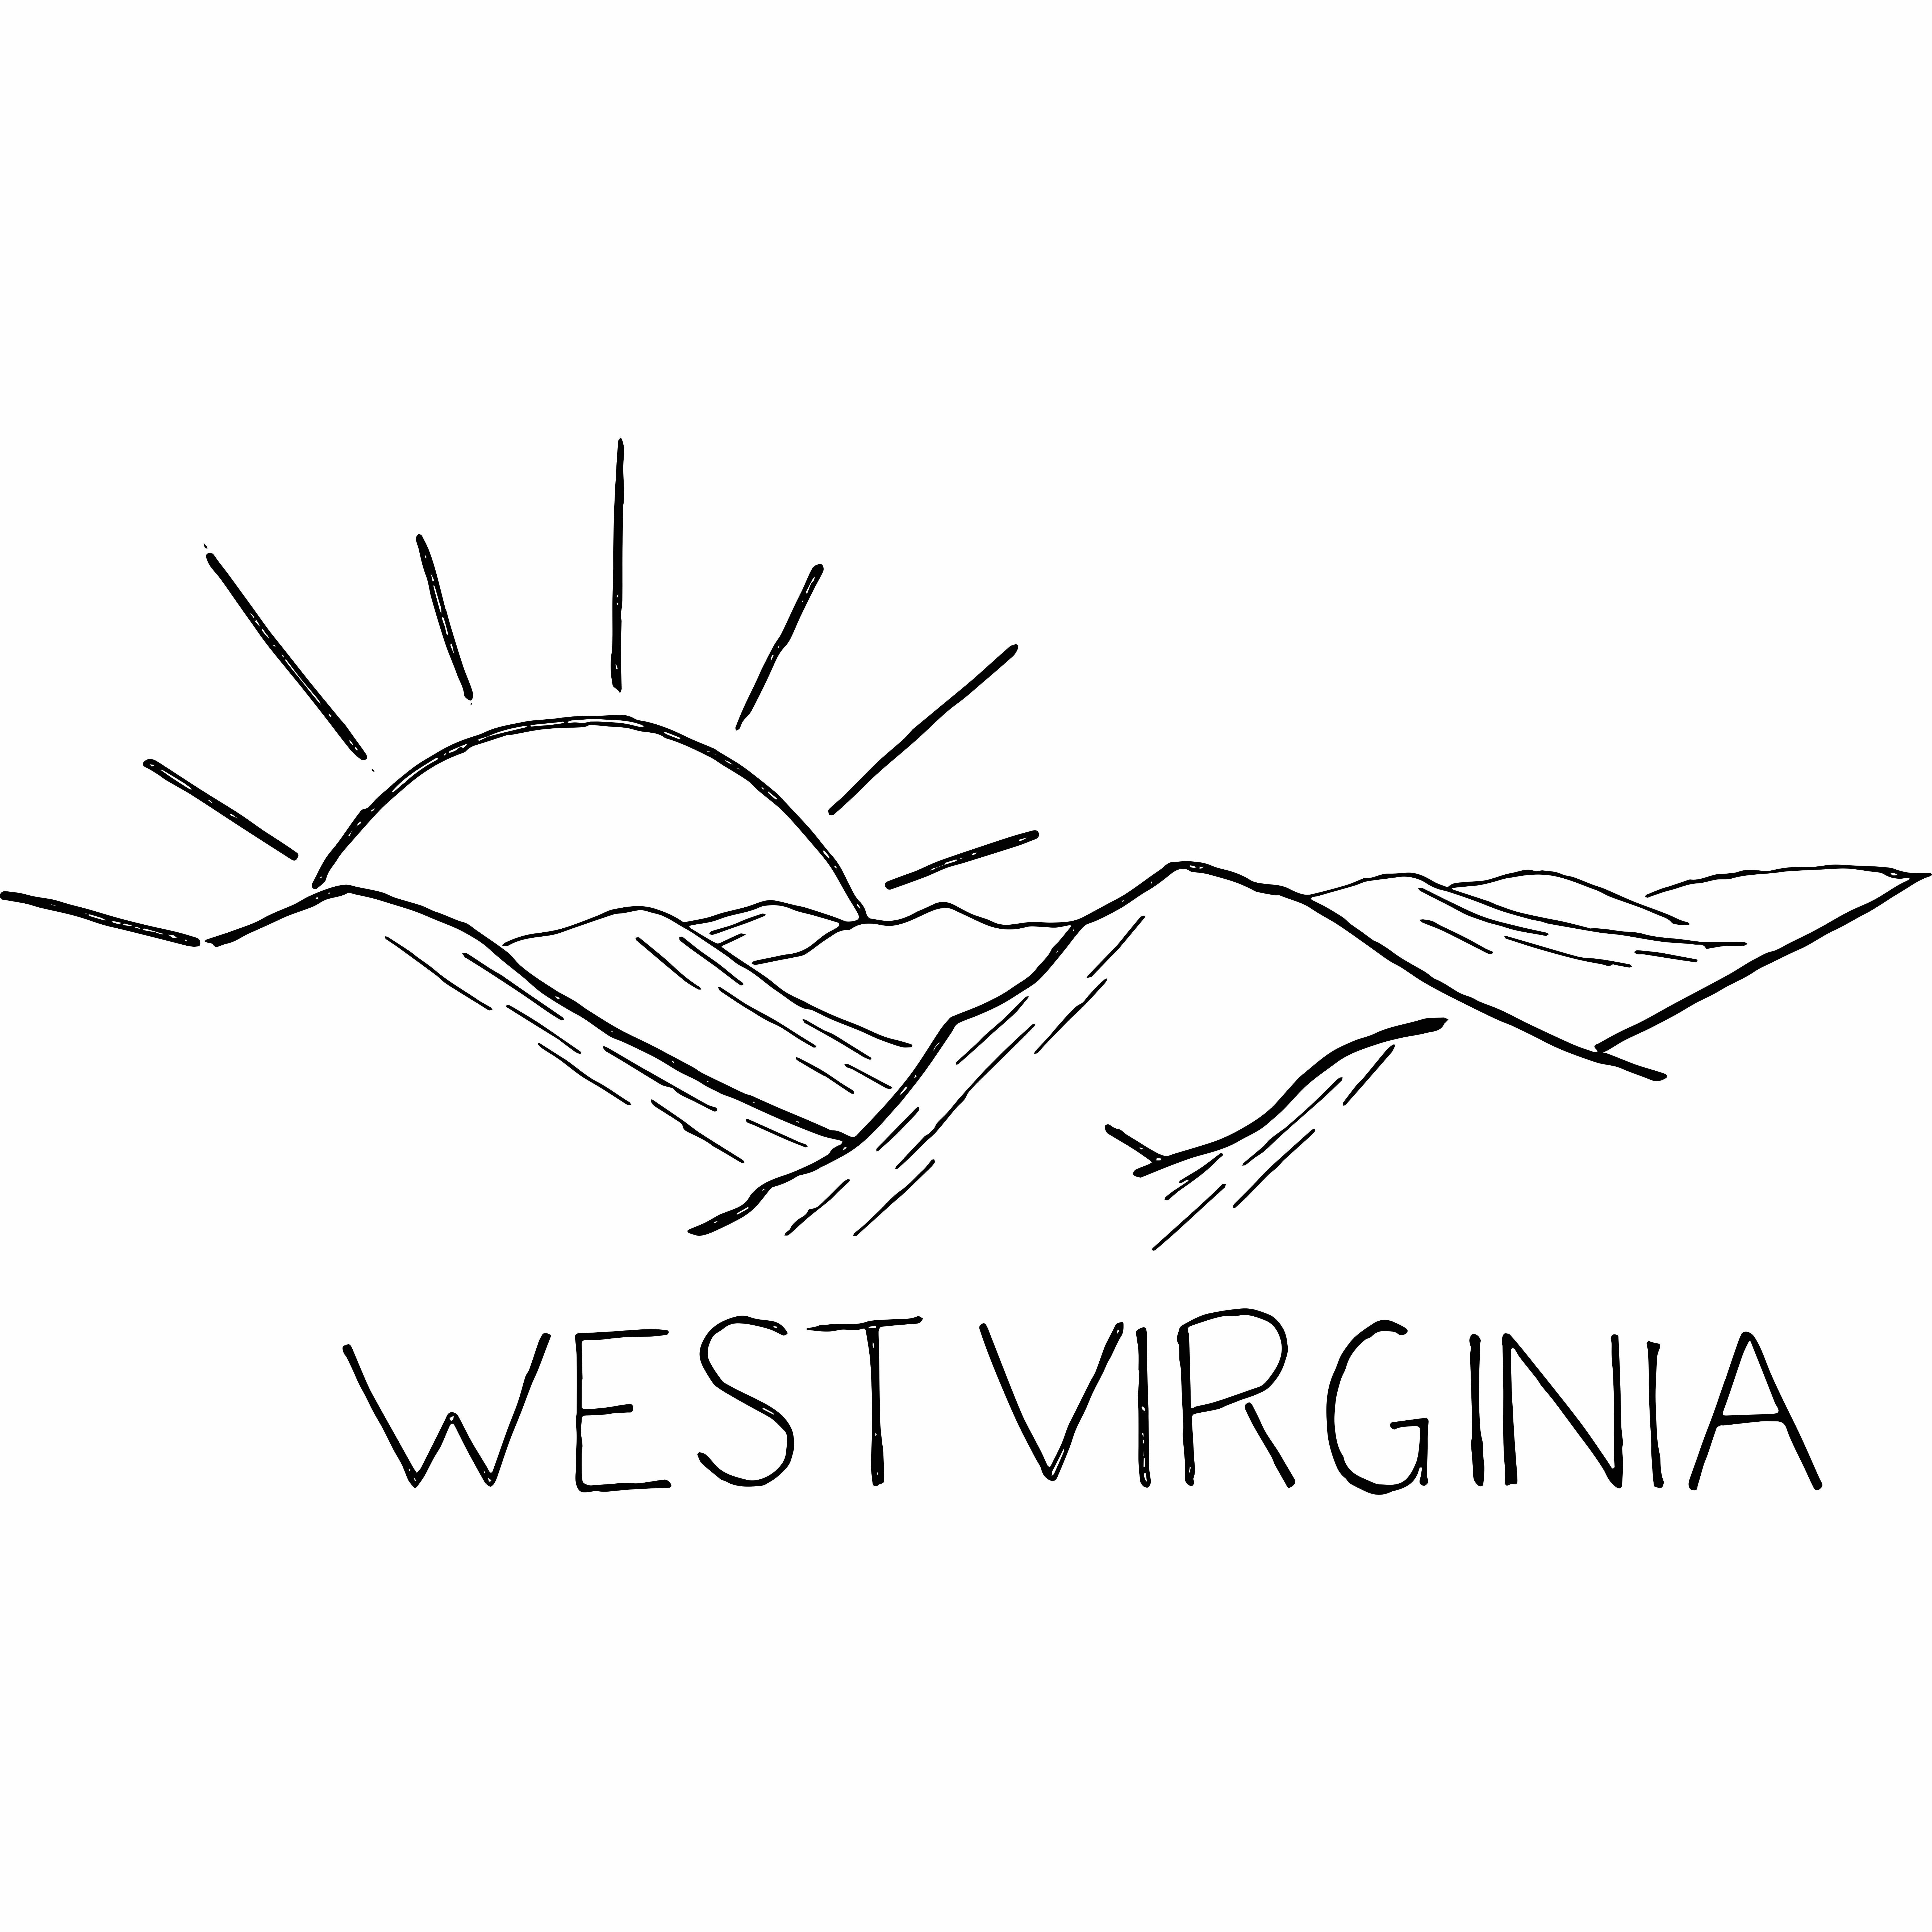 West Virginia Text below mountains and a sunrise.